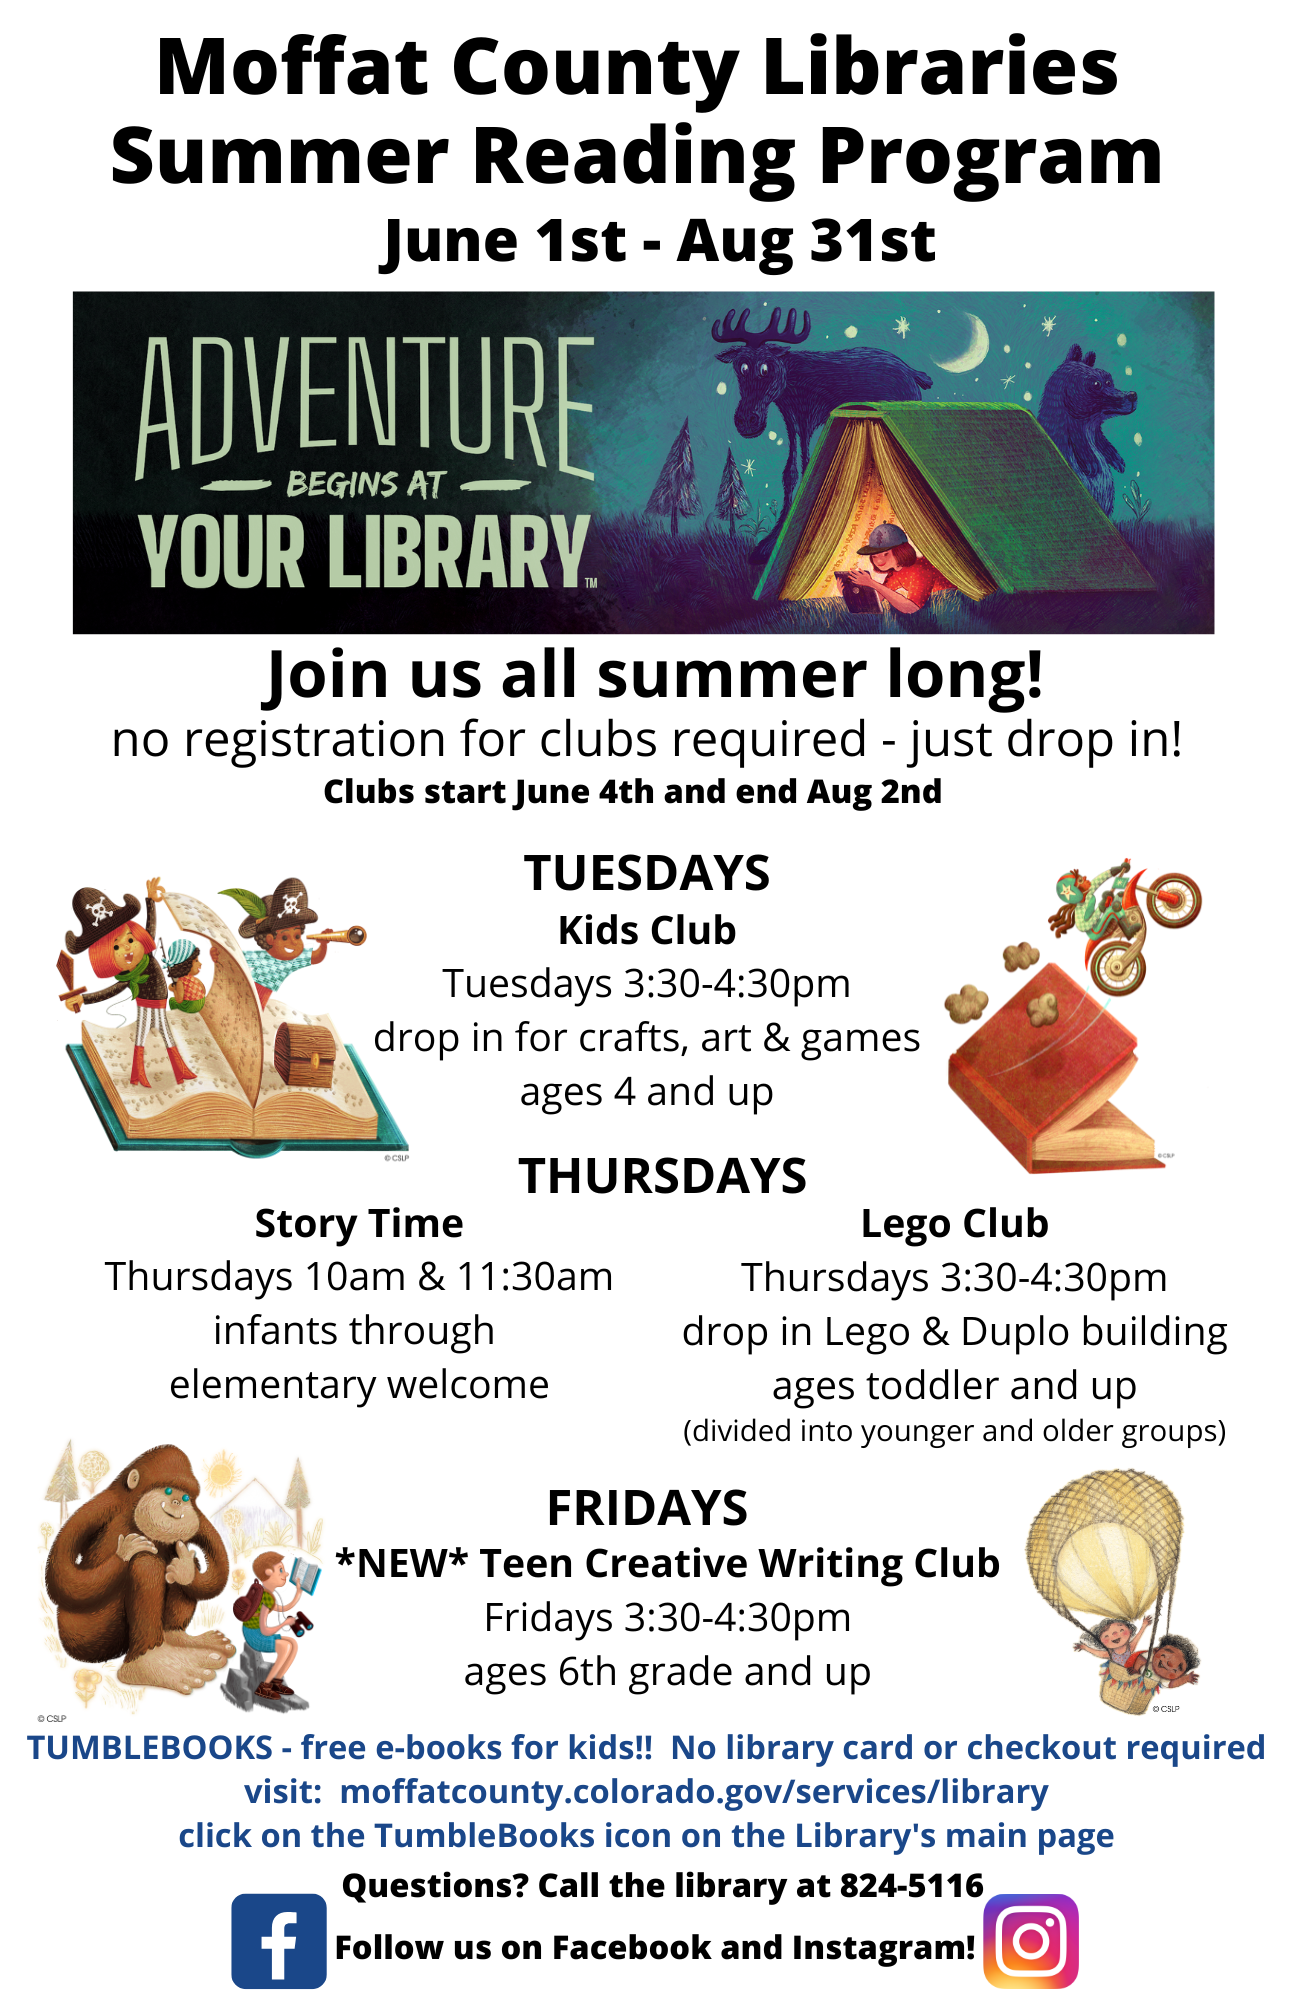 summer activity schedule for kids. Call the library for more information